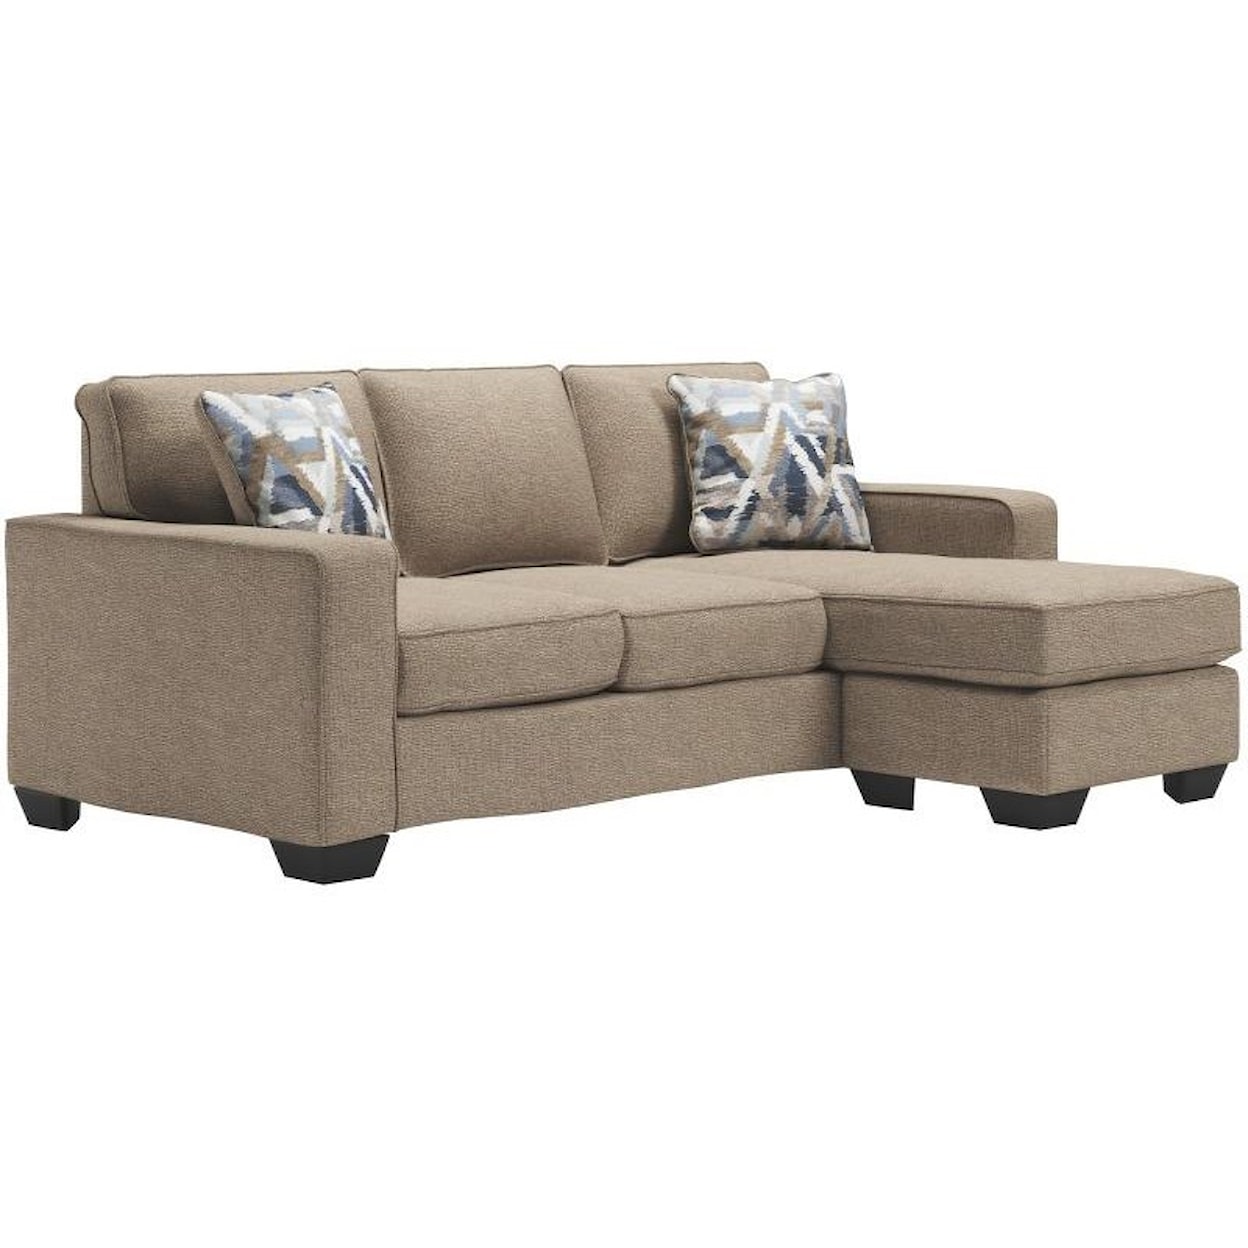 Benchmaster Greaves Greaves Sofa Chaise